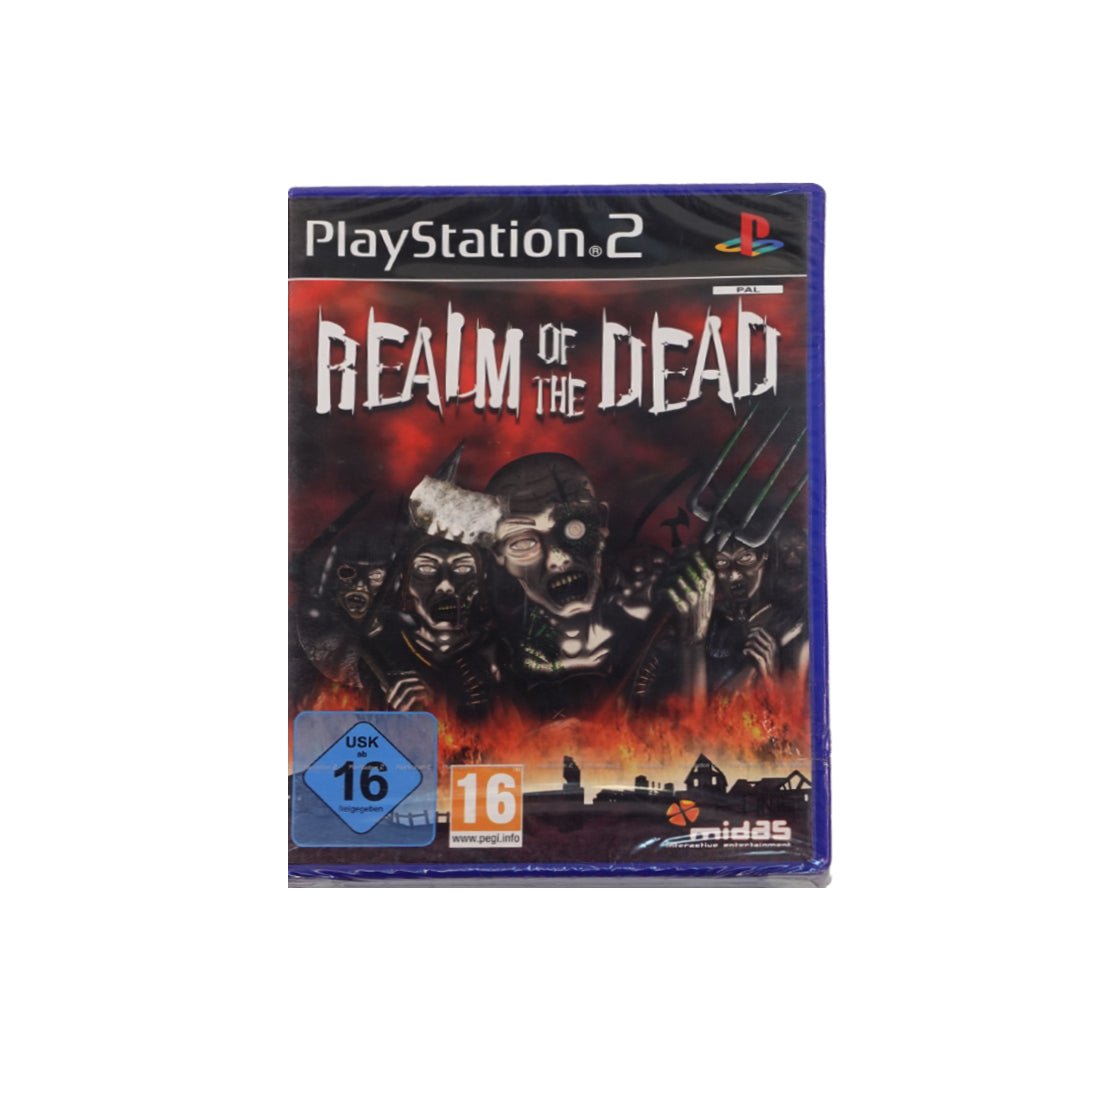 (Pre-Owned) Realm of the Dead - PlayStation 2 - Store 974 | ستور ٩٧٤